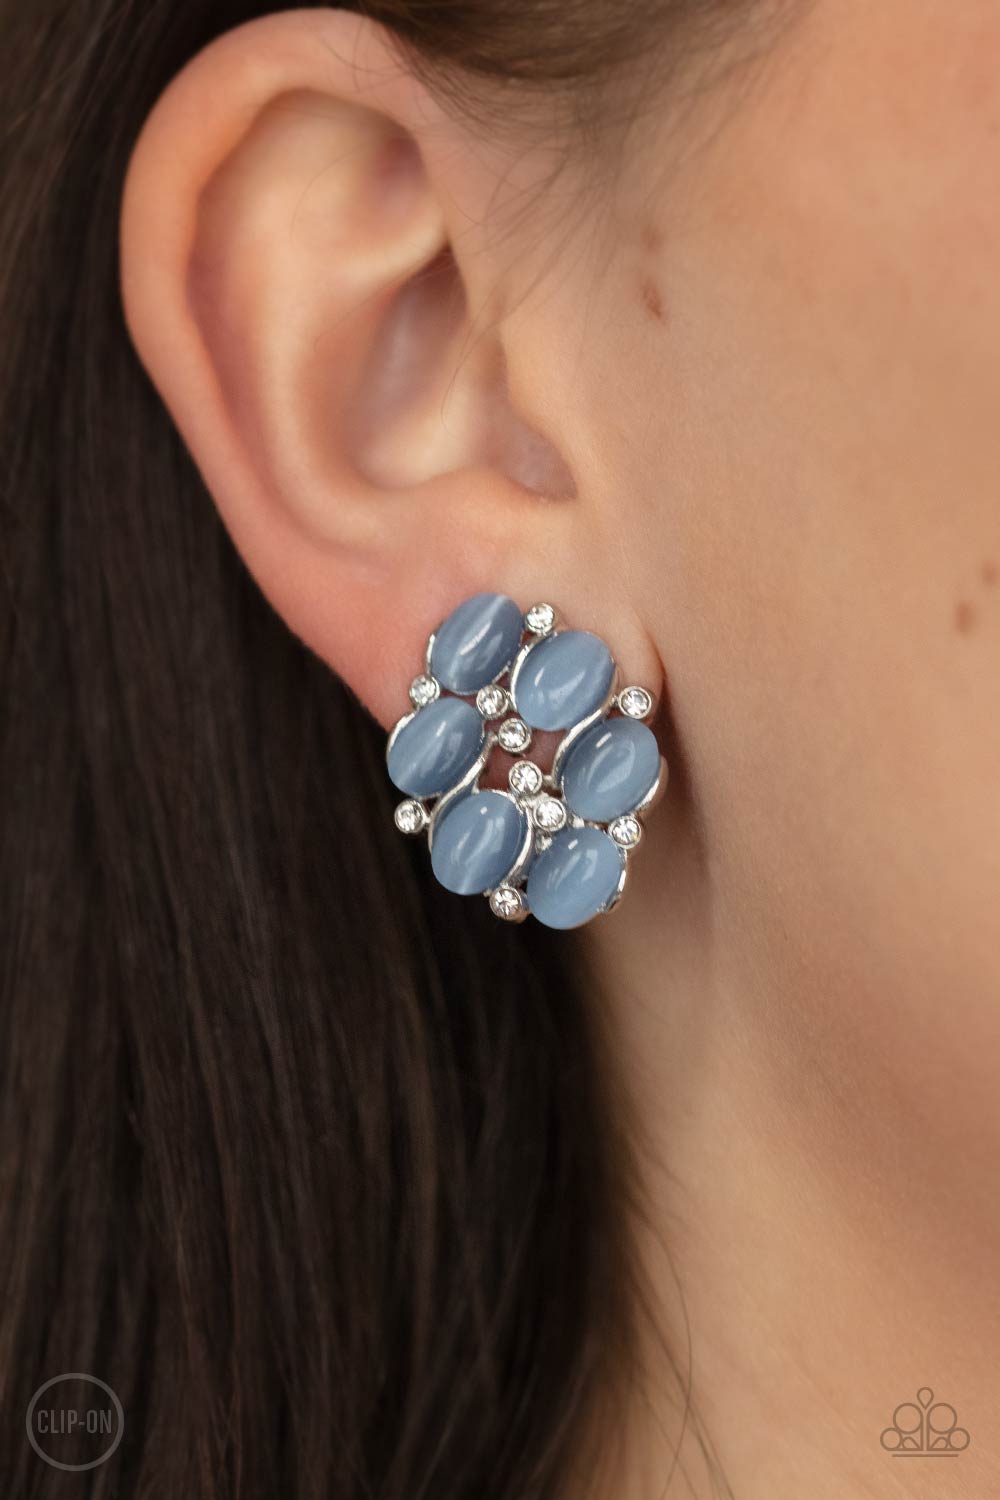 Paparazzi Accessories Row, Row, Row Your Yacht - Blue Earrings - Lady T Accessories